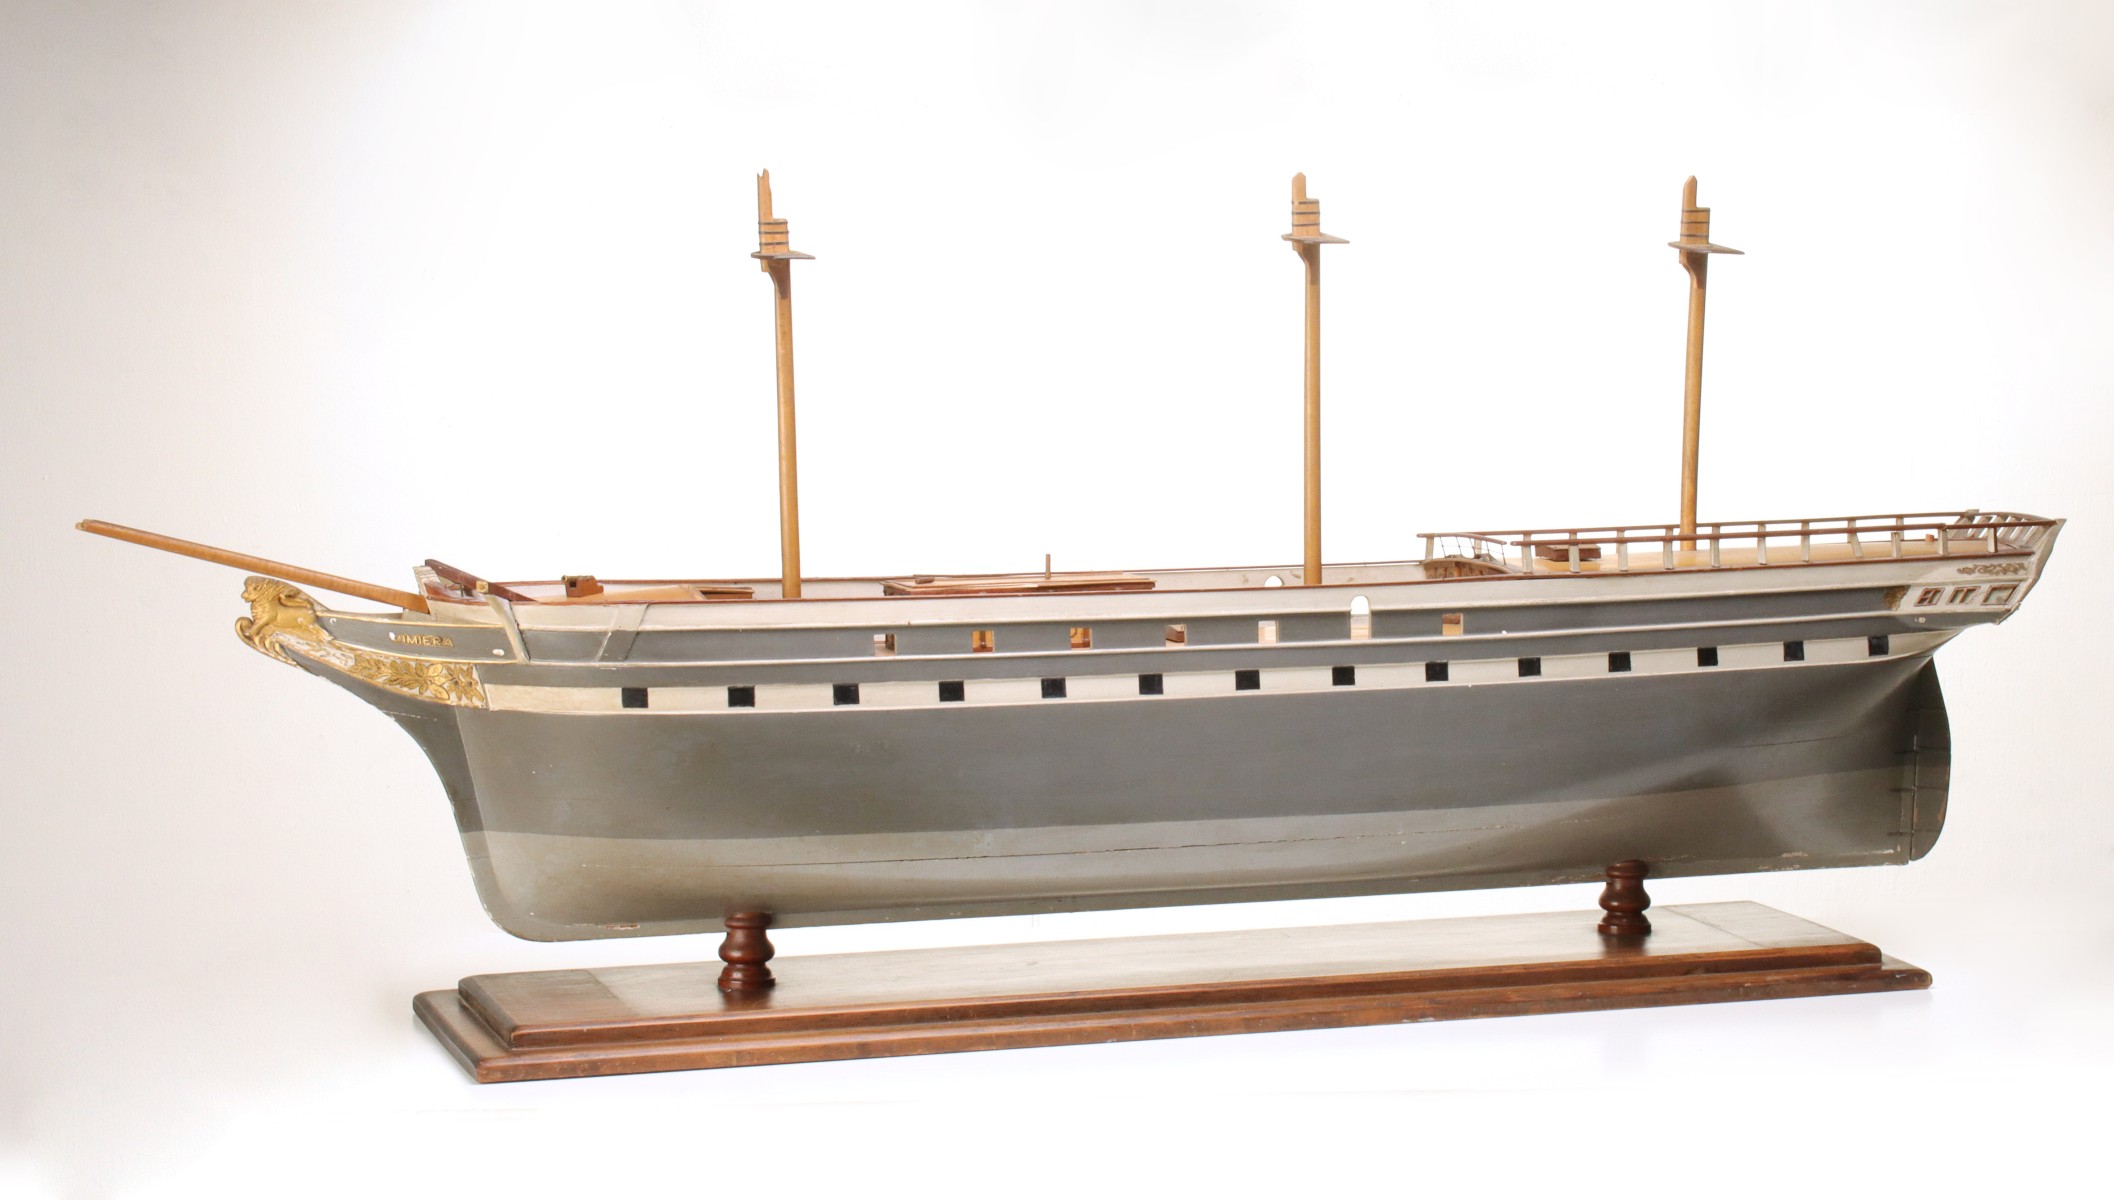 A NICE QUALITY 54-INCH SHIP MODEL NAMED VIMIERA